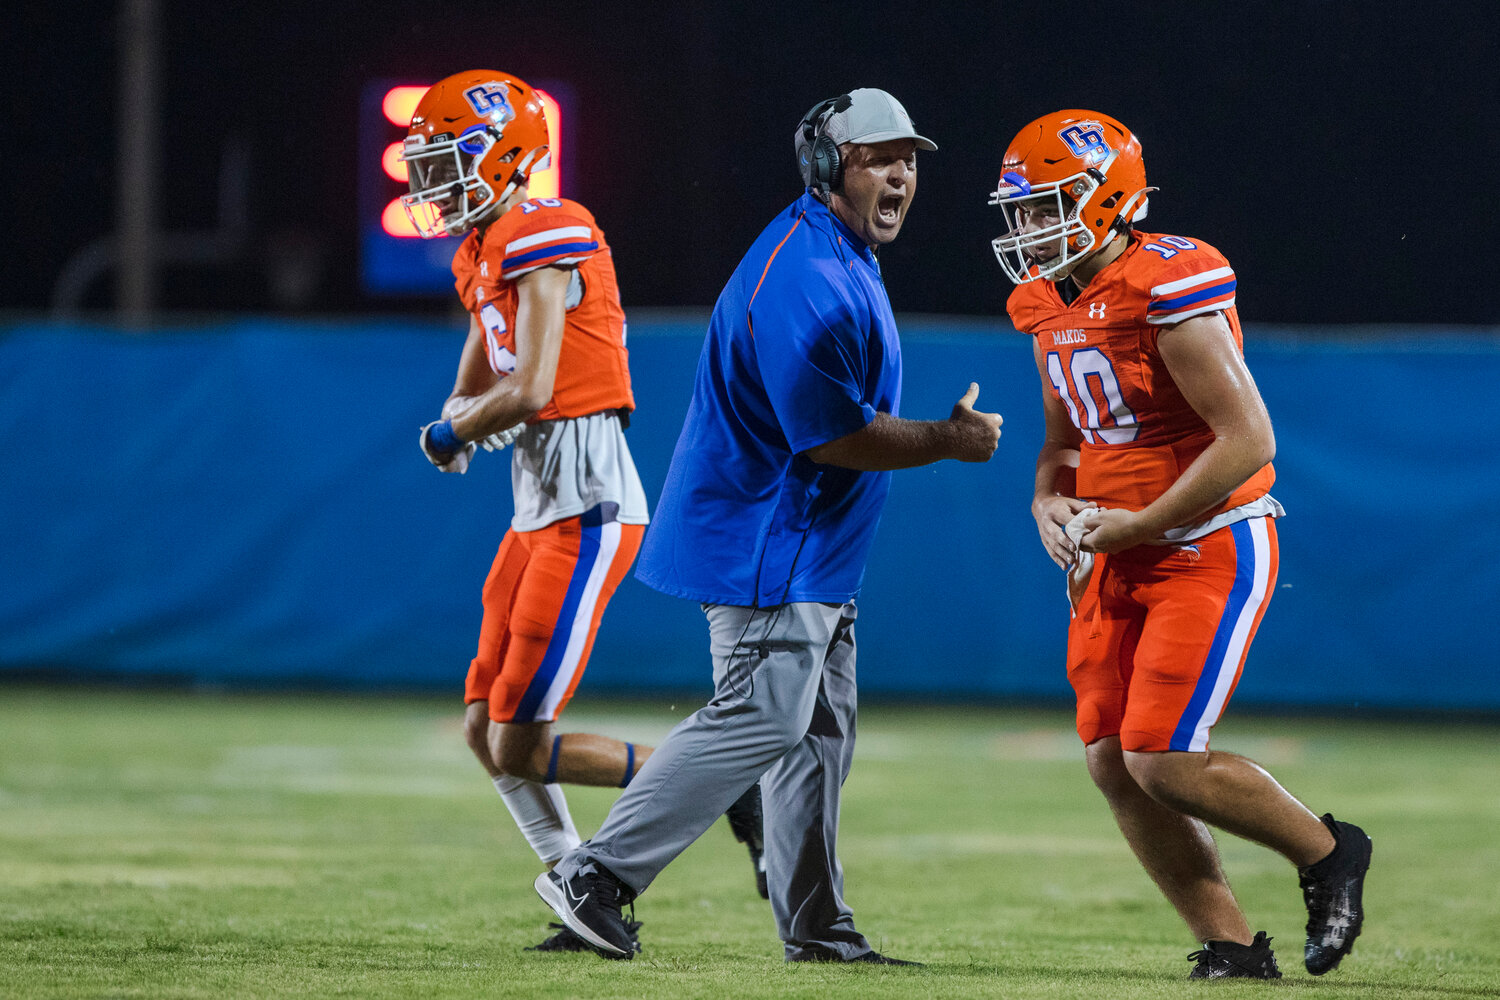 Orange Beach head coach Jamey DuBose celebrates a Mako touchdown during their homecoming contest against the Satsuma Gators on Sept. 15 at the Orange Beach Sportsplex. DuBose helped lead Orange Beach’s first home playoff game with an 8-3 overall record in 2022.